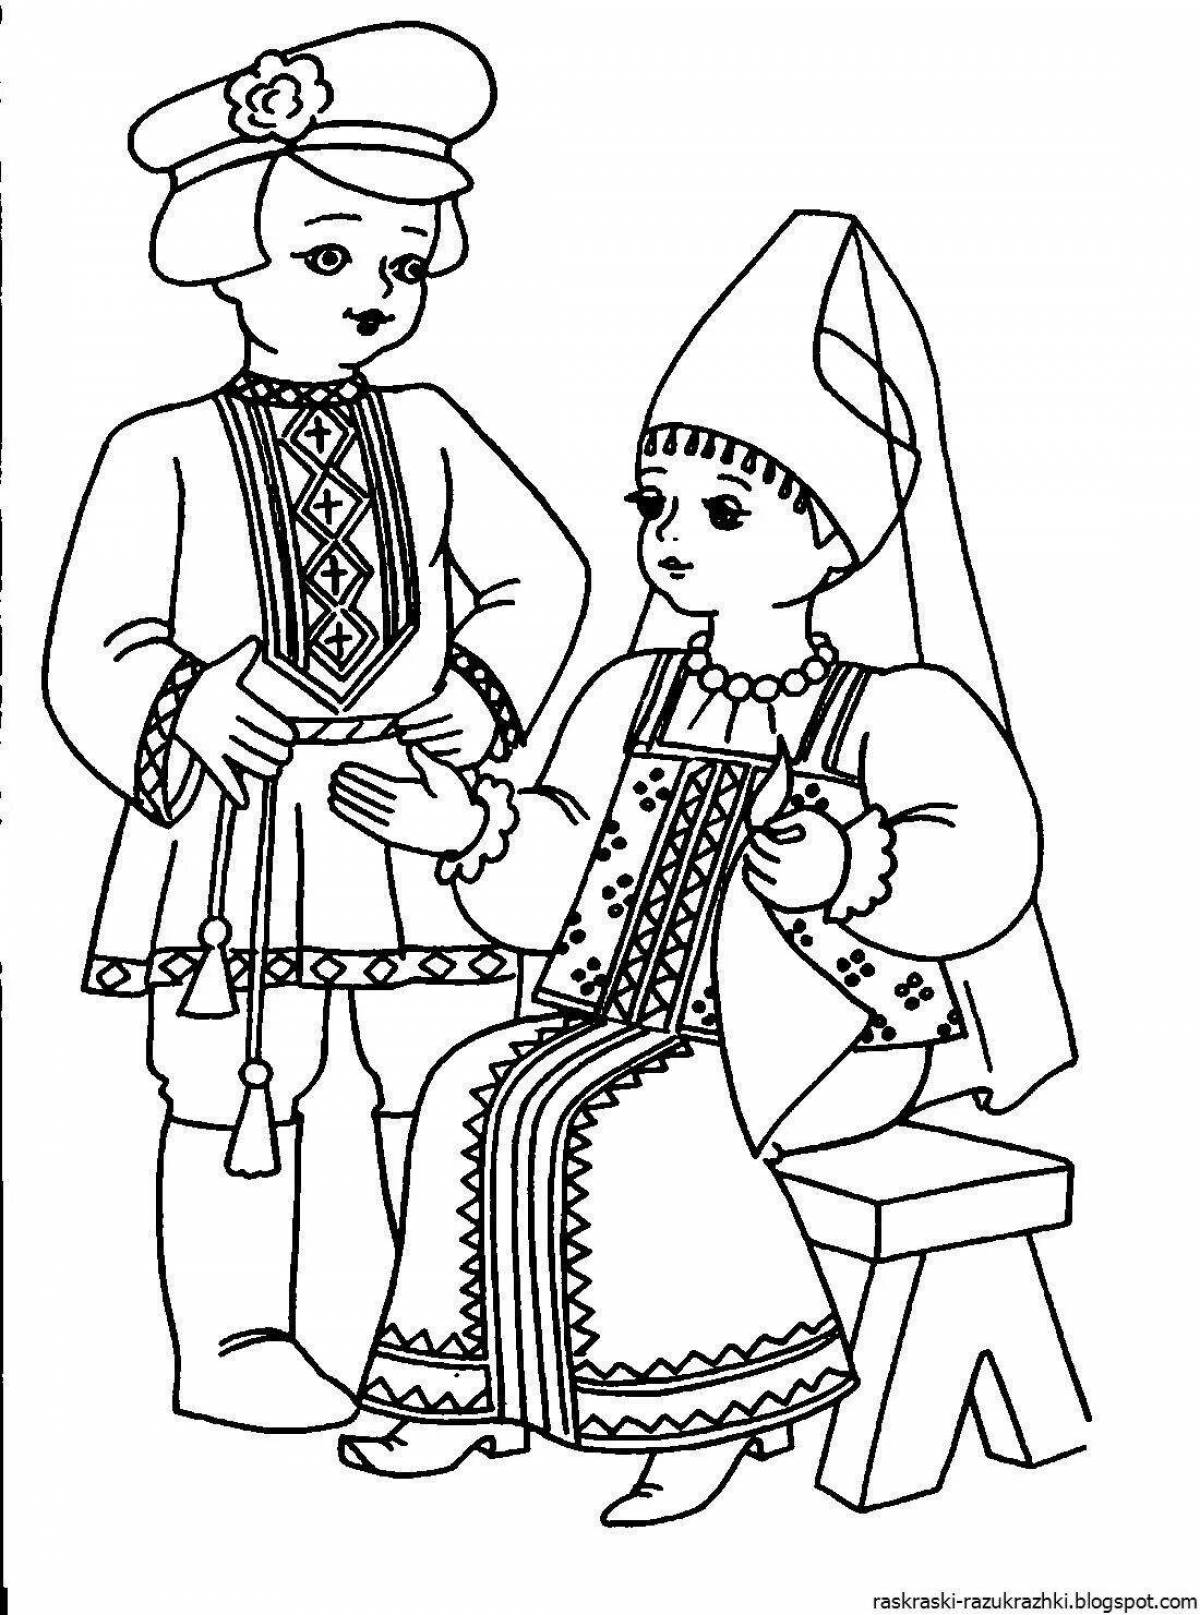 Coloring page charming Russian traditions